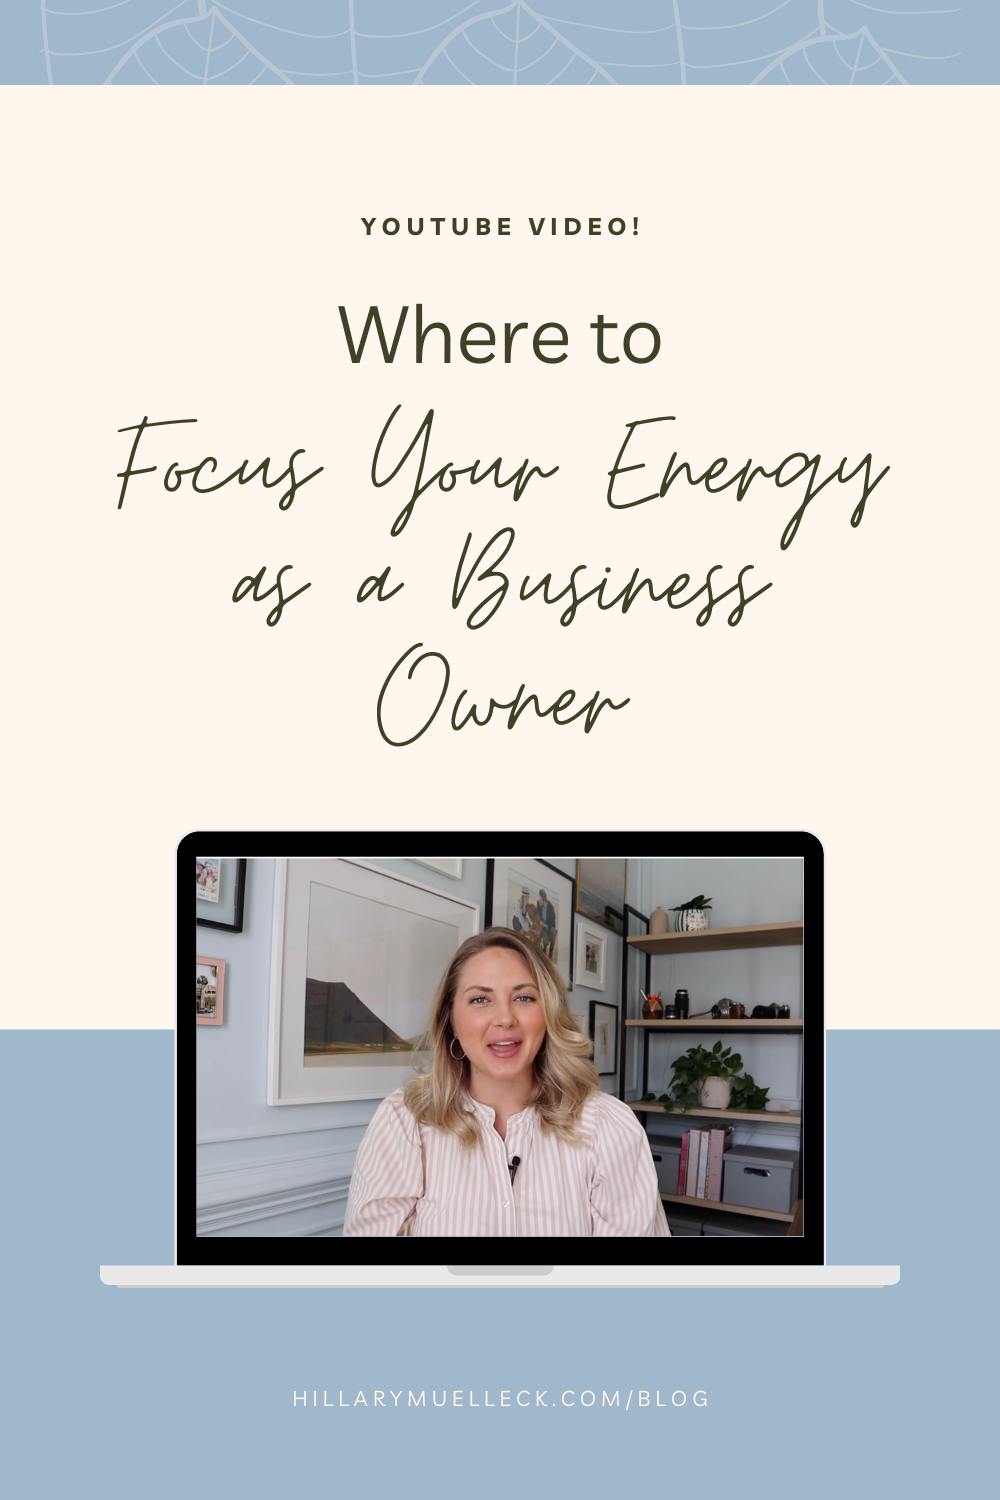 Wedding photographer Hillary Muelleck shares where to focus your energy as a business owner - and what to take off your plate